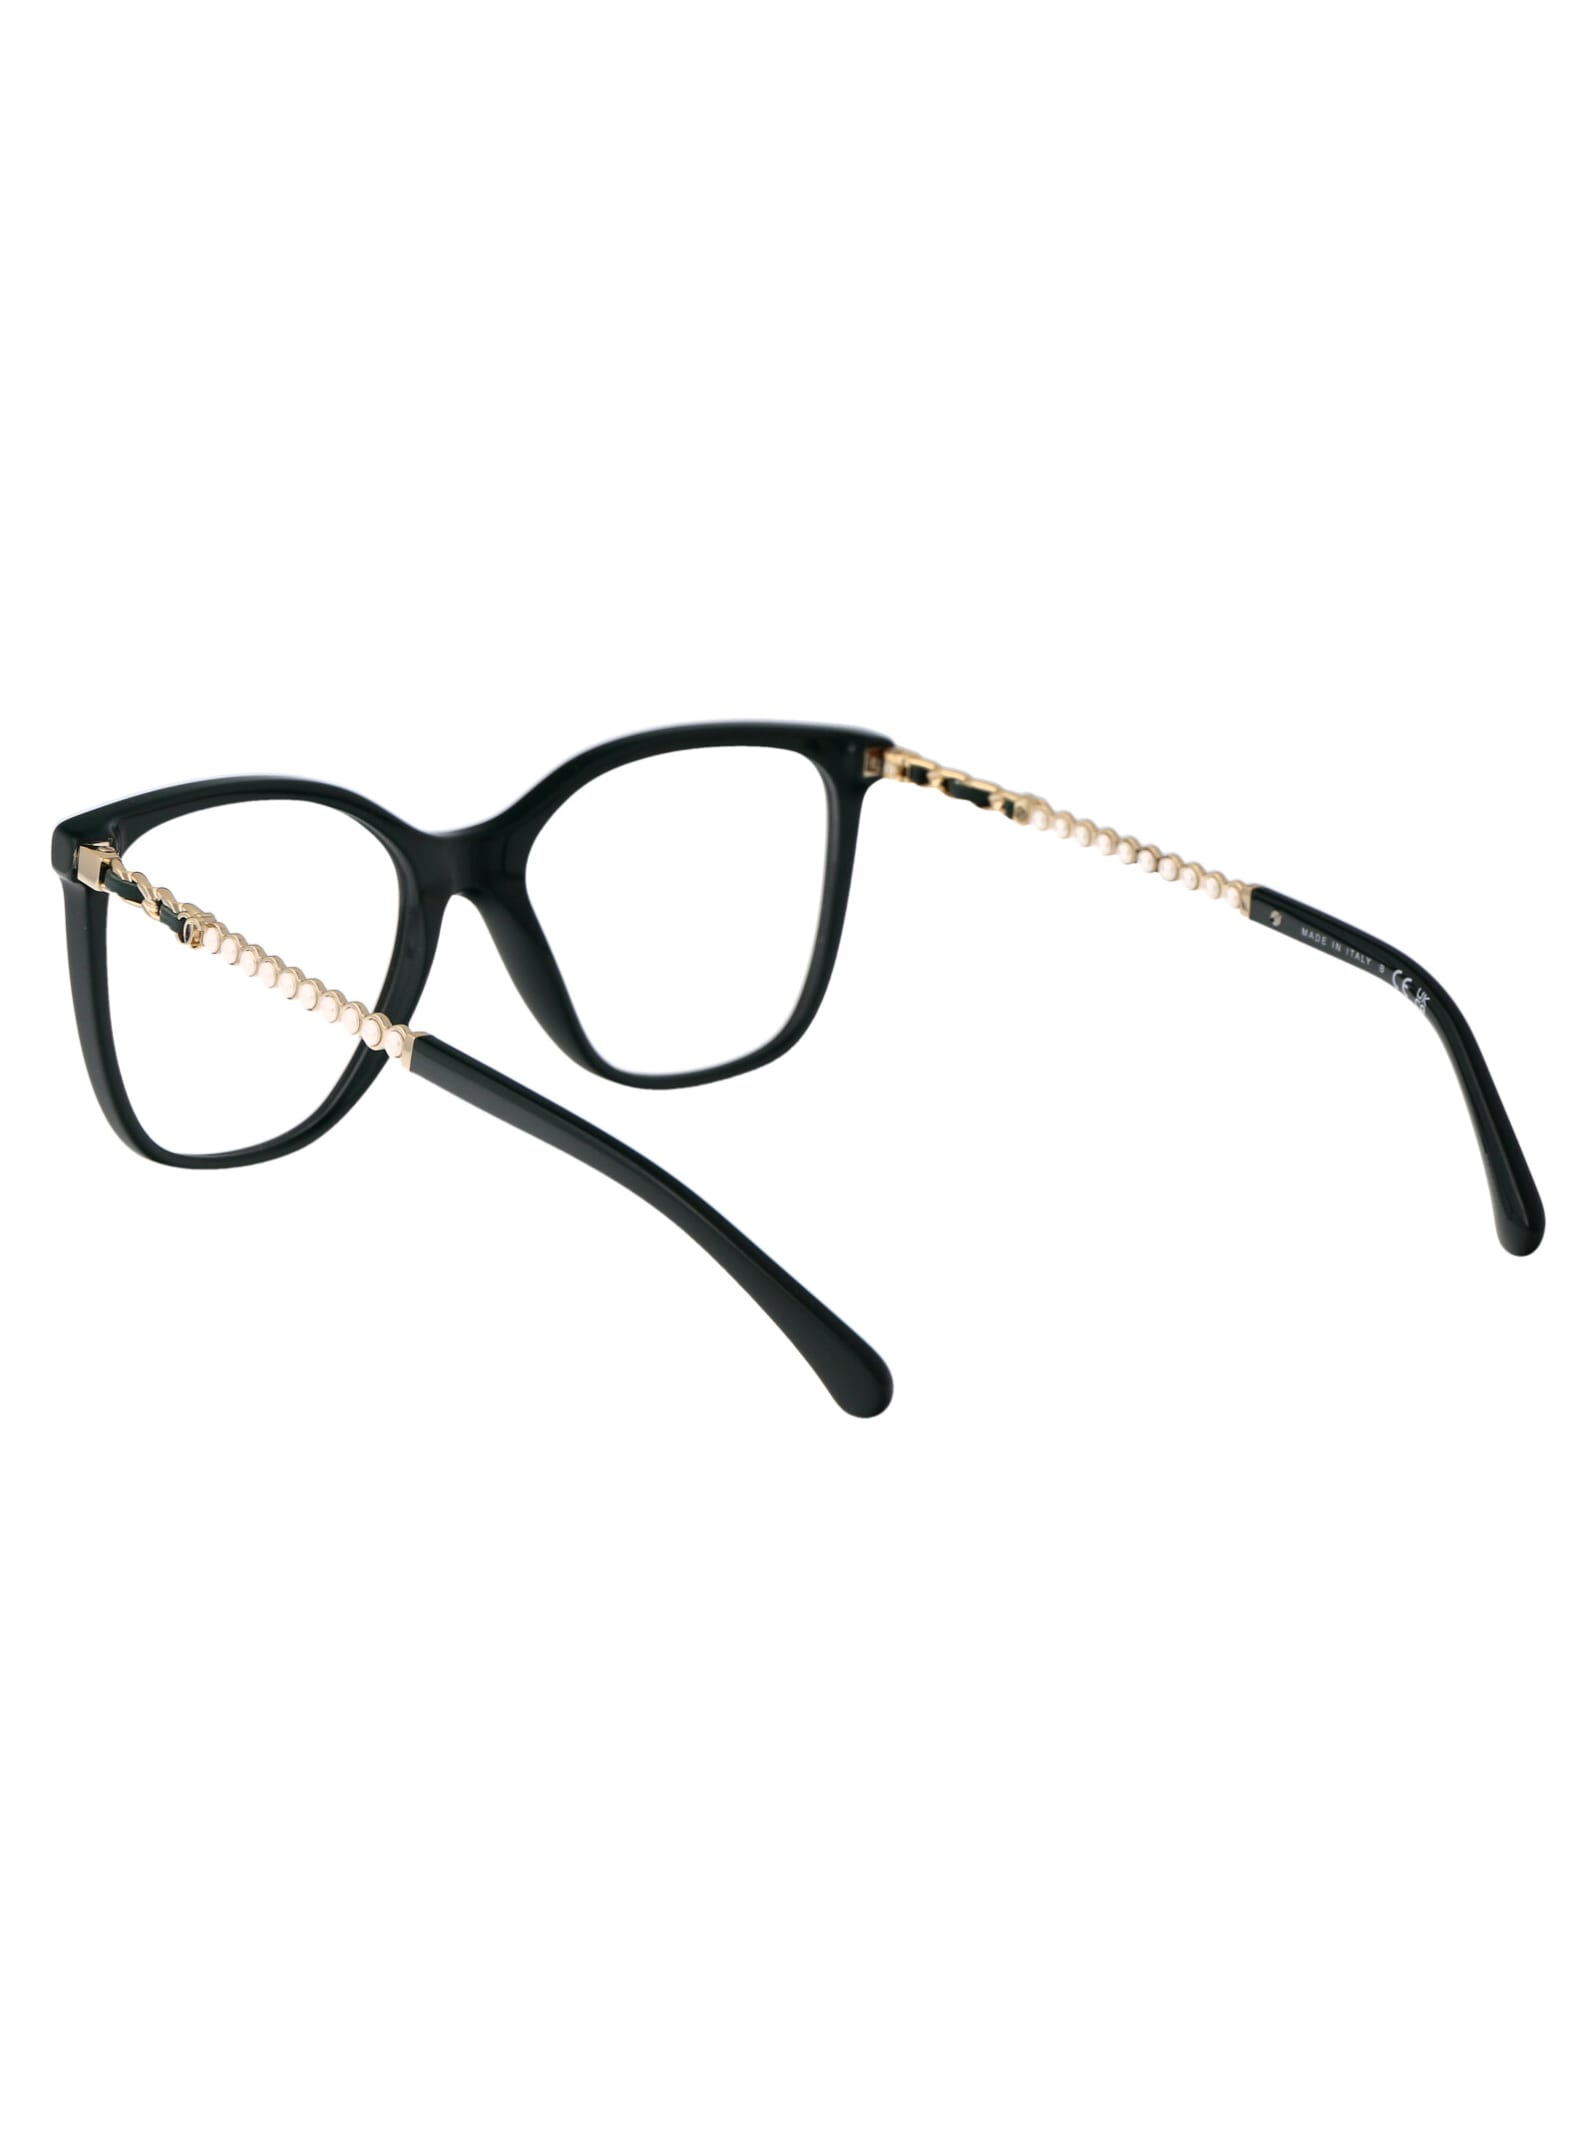 Pre-owned Chanel 0ch3441qh Glasses In 1459 Green